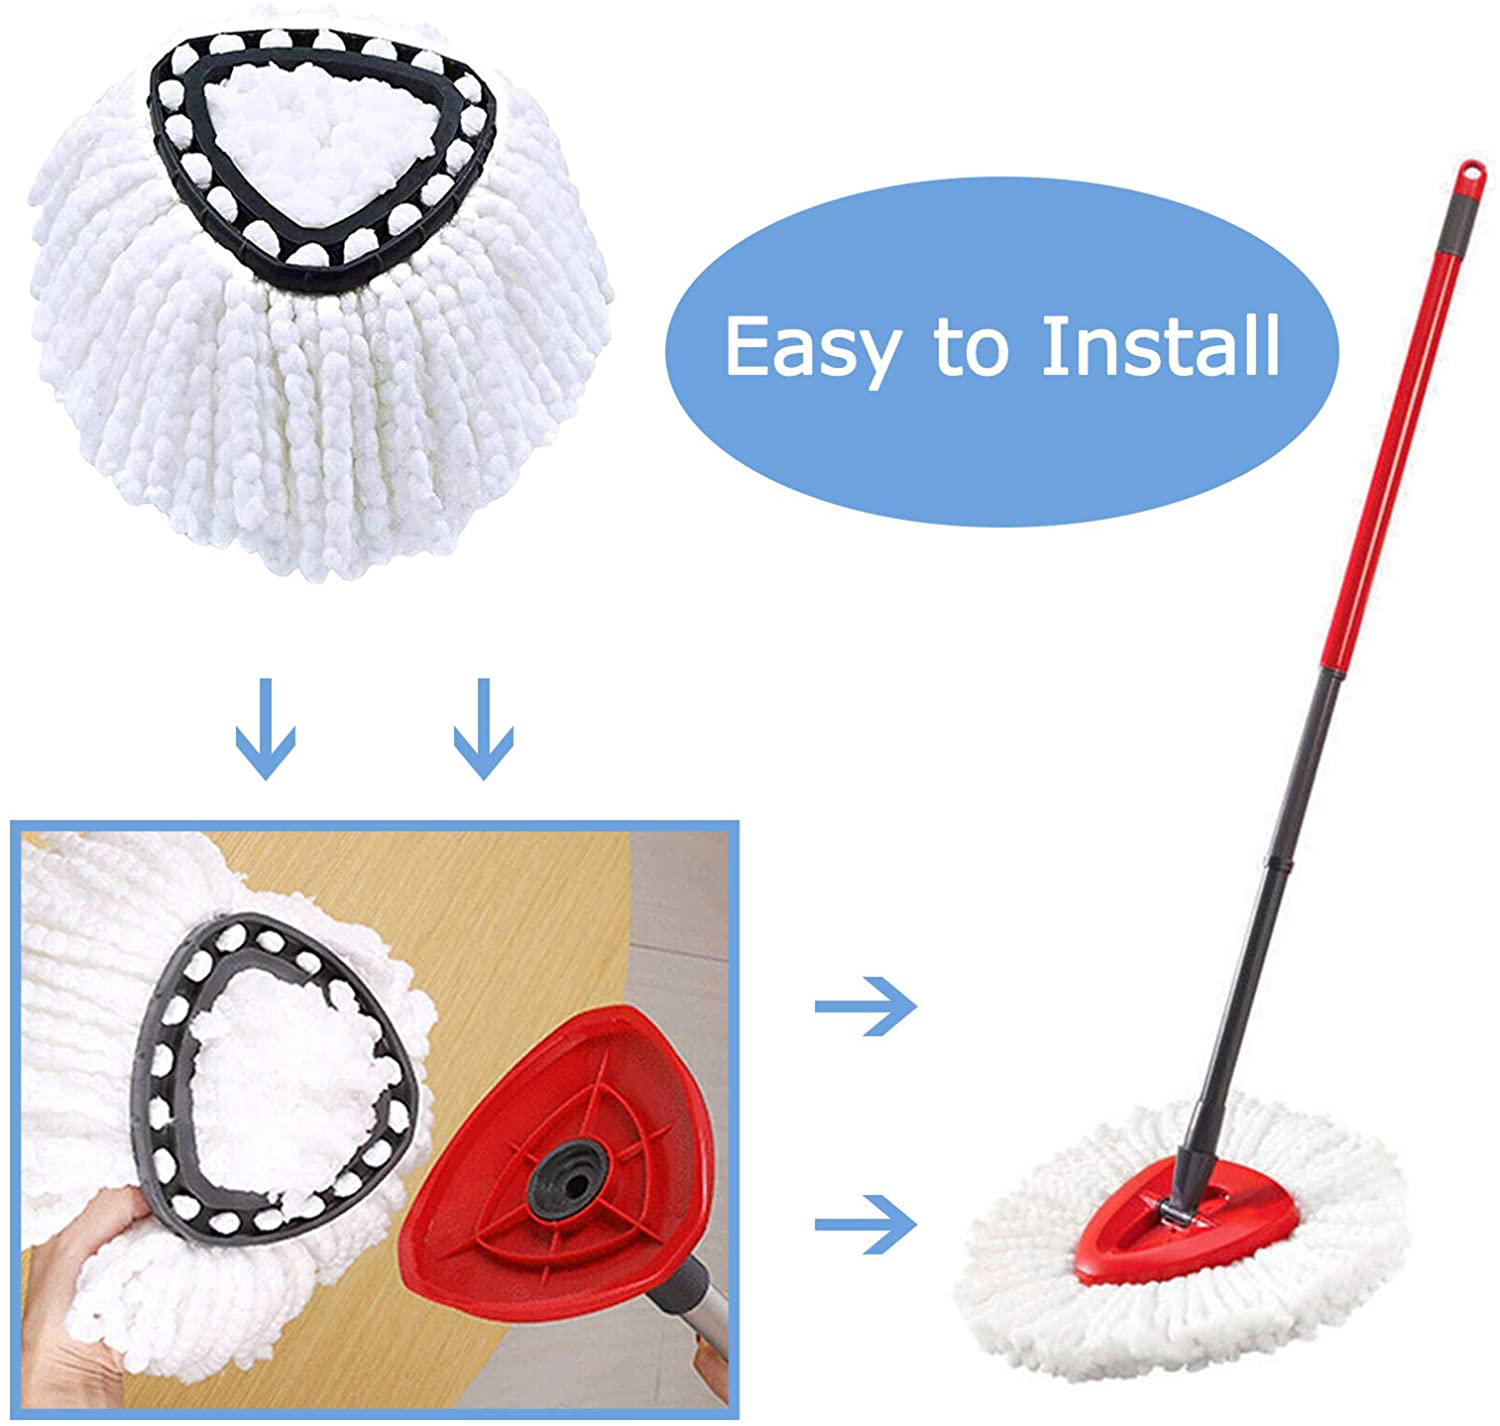 Mop Replacement Heads Fit for Microfiber Easywring Spin Mop Refill, Spin Mop Head Replacement, Easy Cleaning Mop Head Refill - 6 Pack